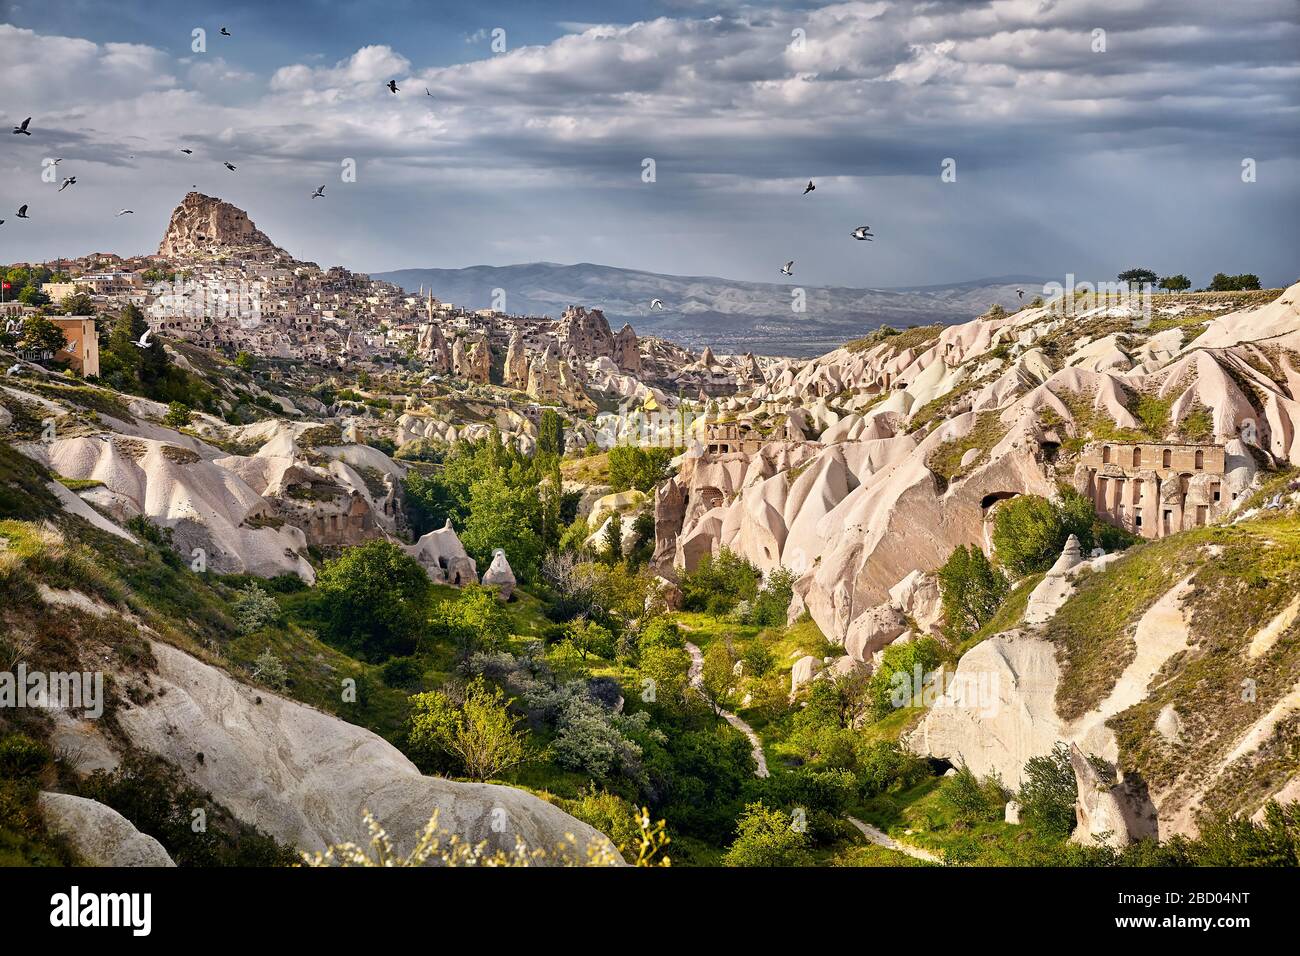 Uchisar castle and pigeon valley at cloudy sky in Cappadocia, Turkey Stock Photo